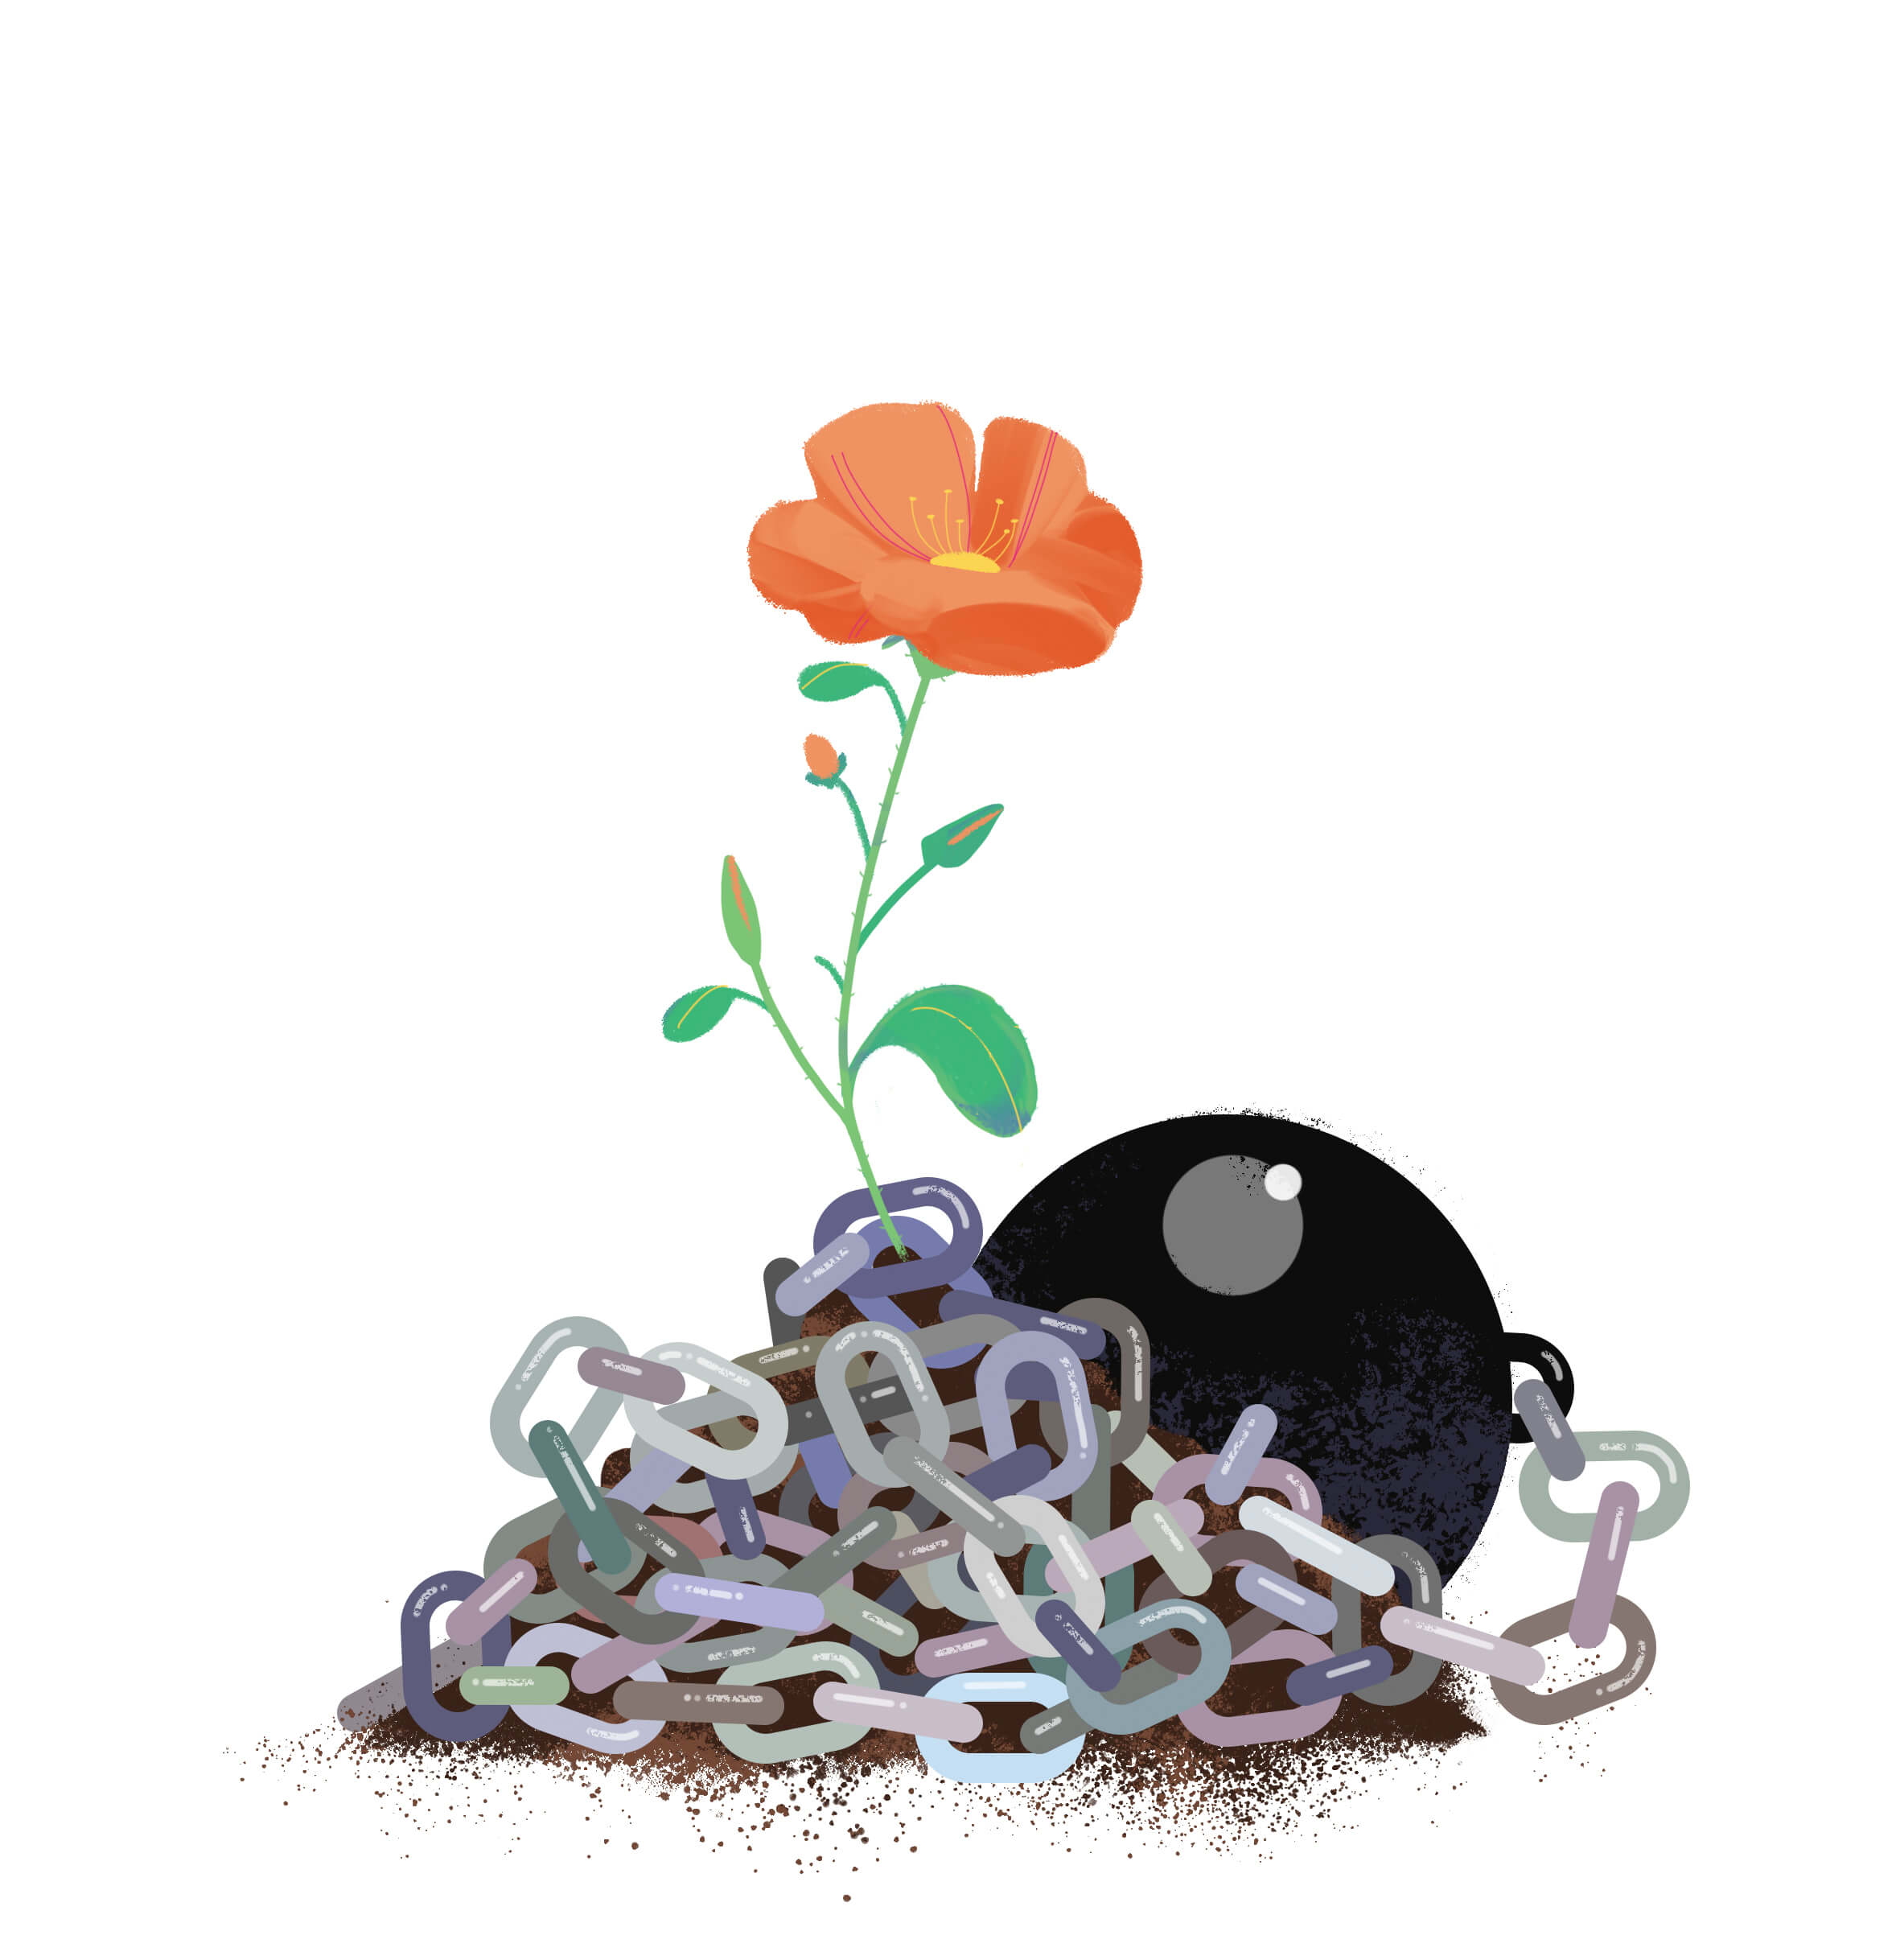 A fragile, thin flower chained in a pile of heavy iron.